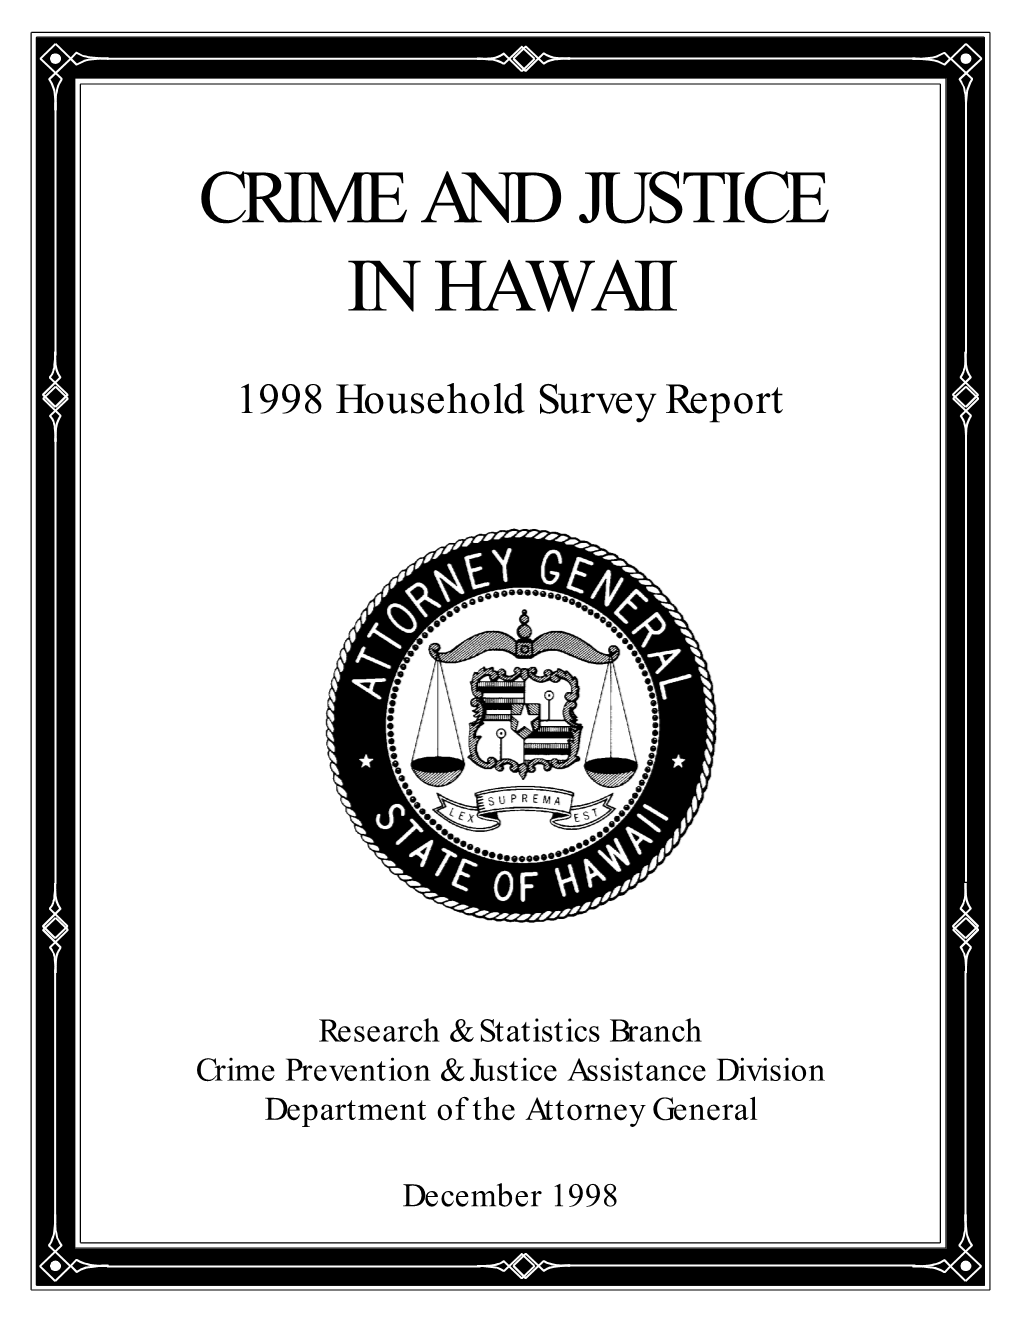 Crime and Justice in Hawaii: Hawaii Household Survey Report, 1998